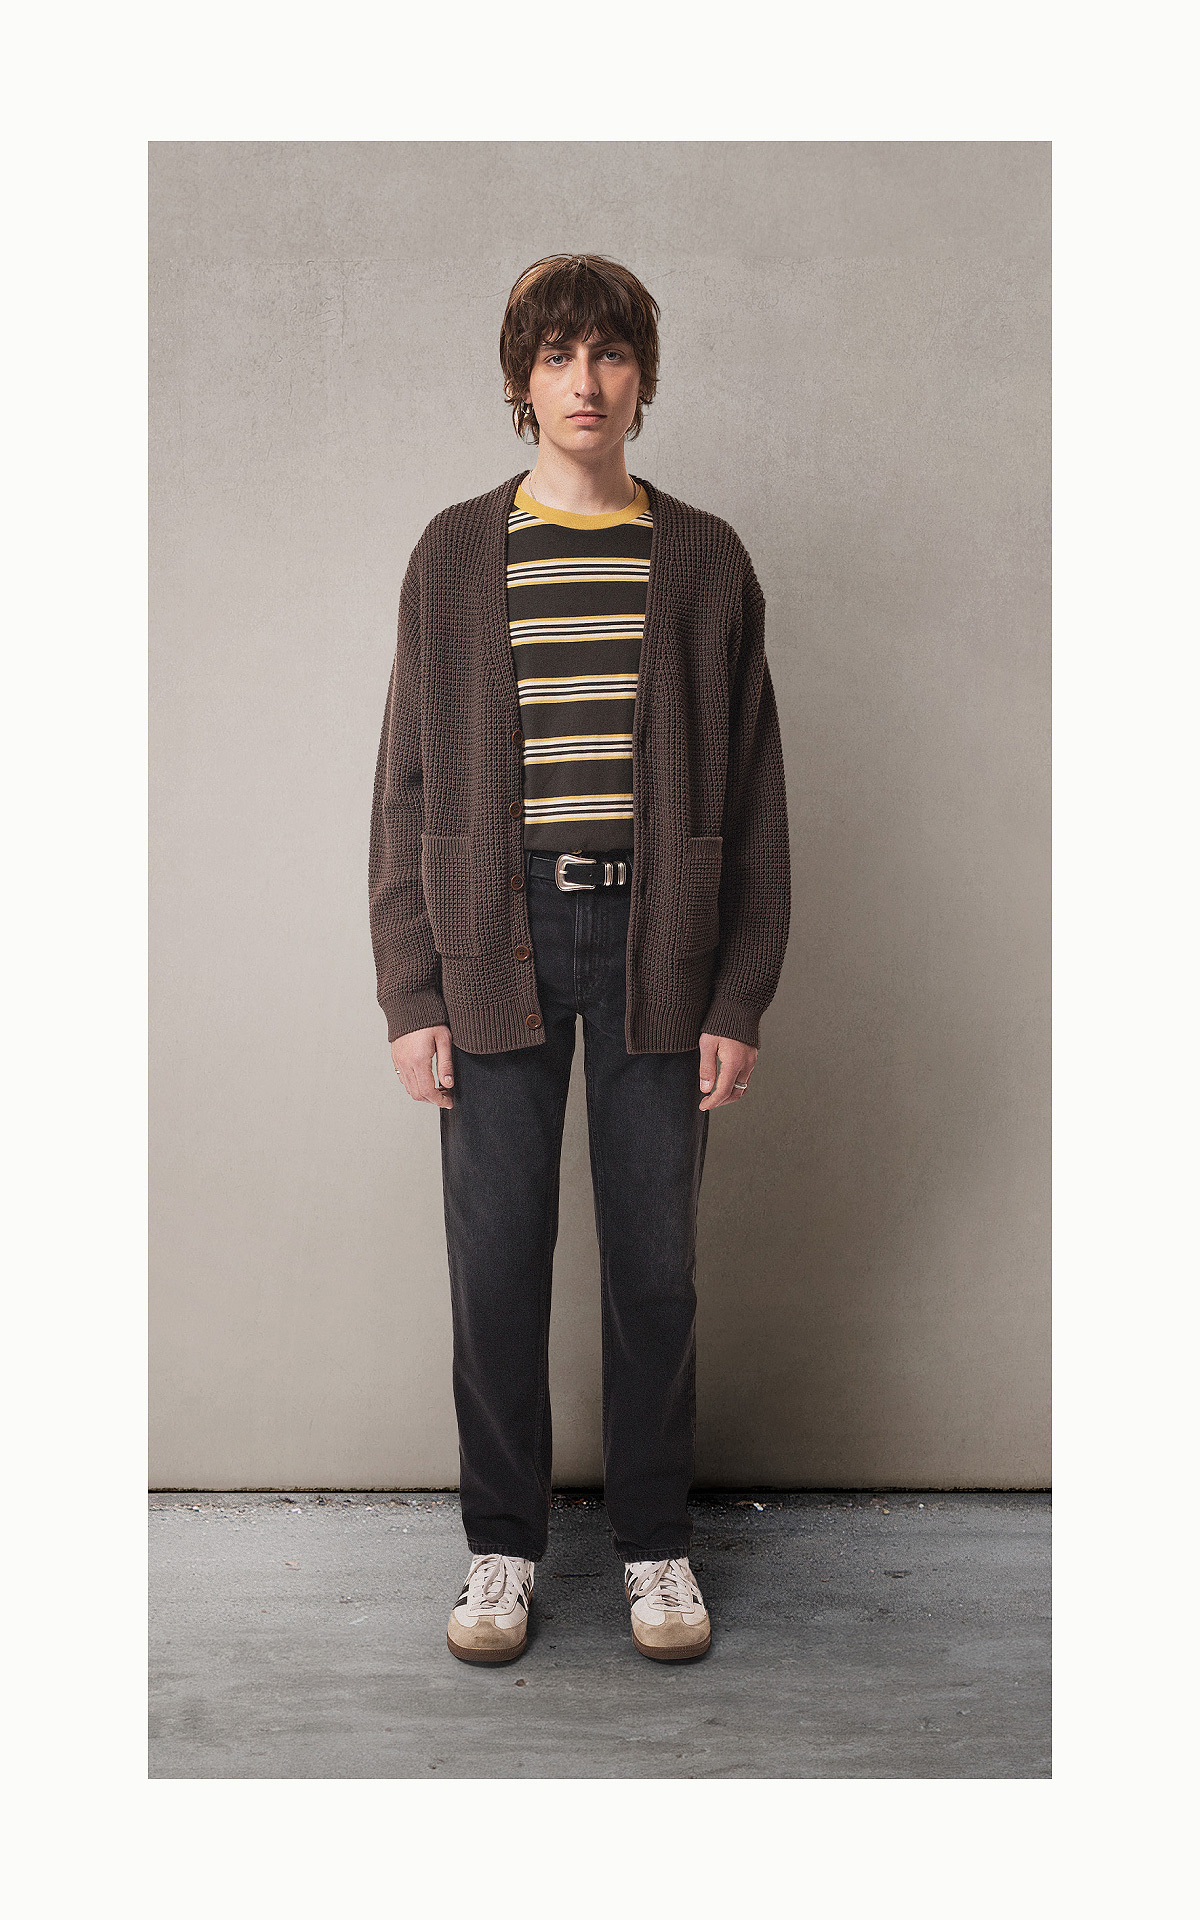 UO Mae Poplin Utility Pant  Urban Outfitters Japan - Clothing, Music, Home  & Accessories